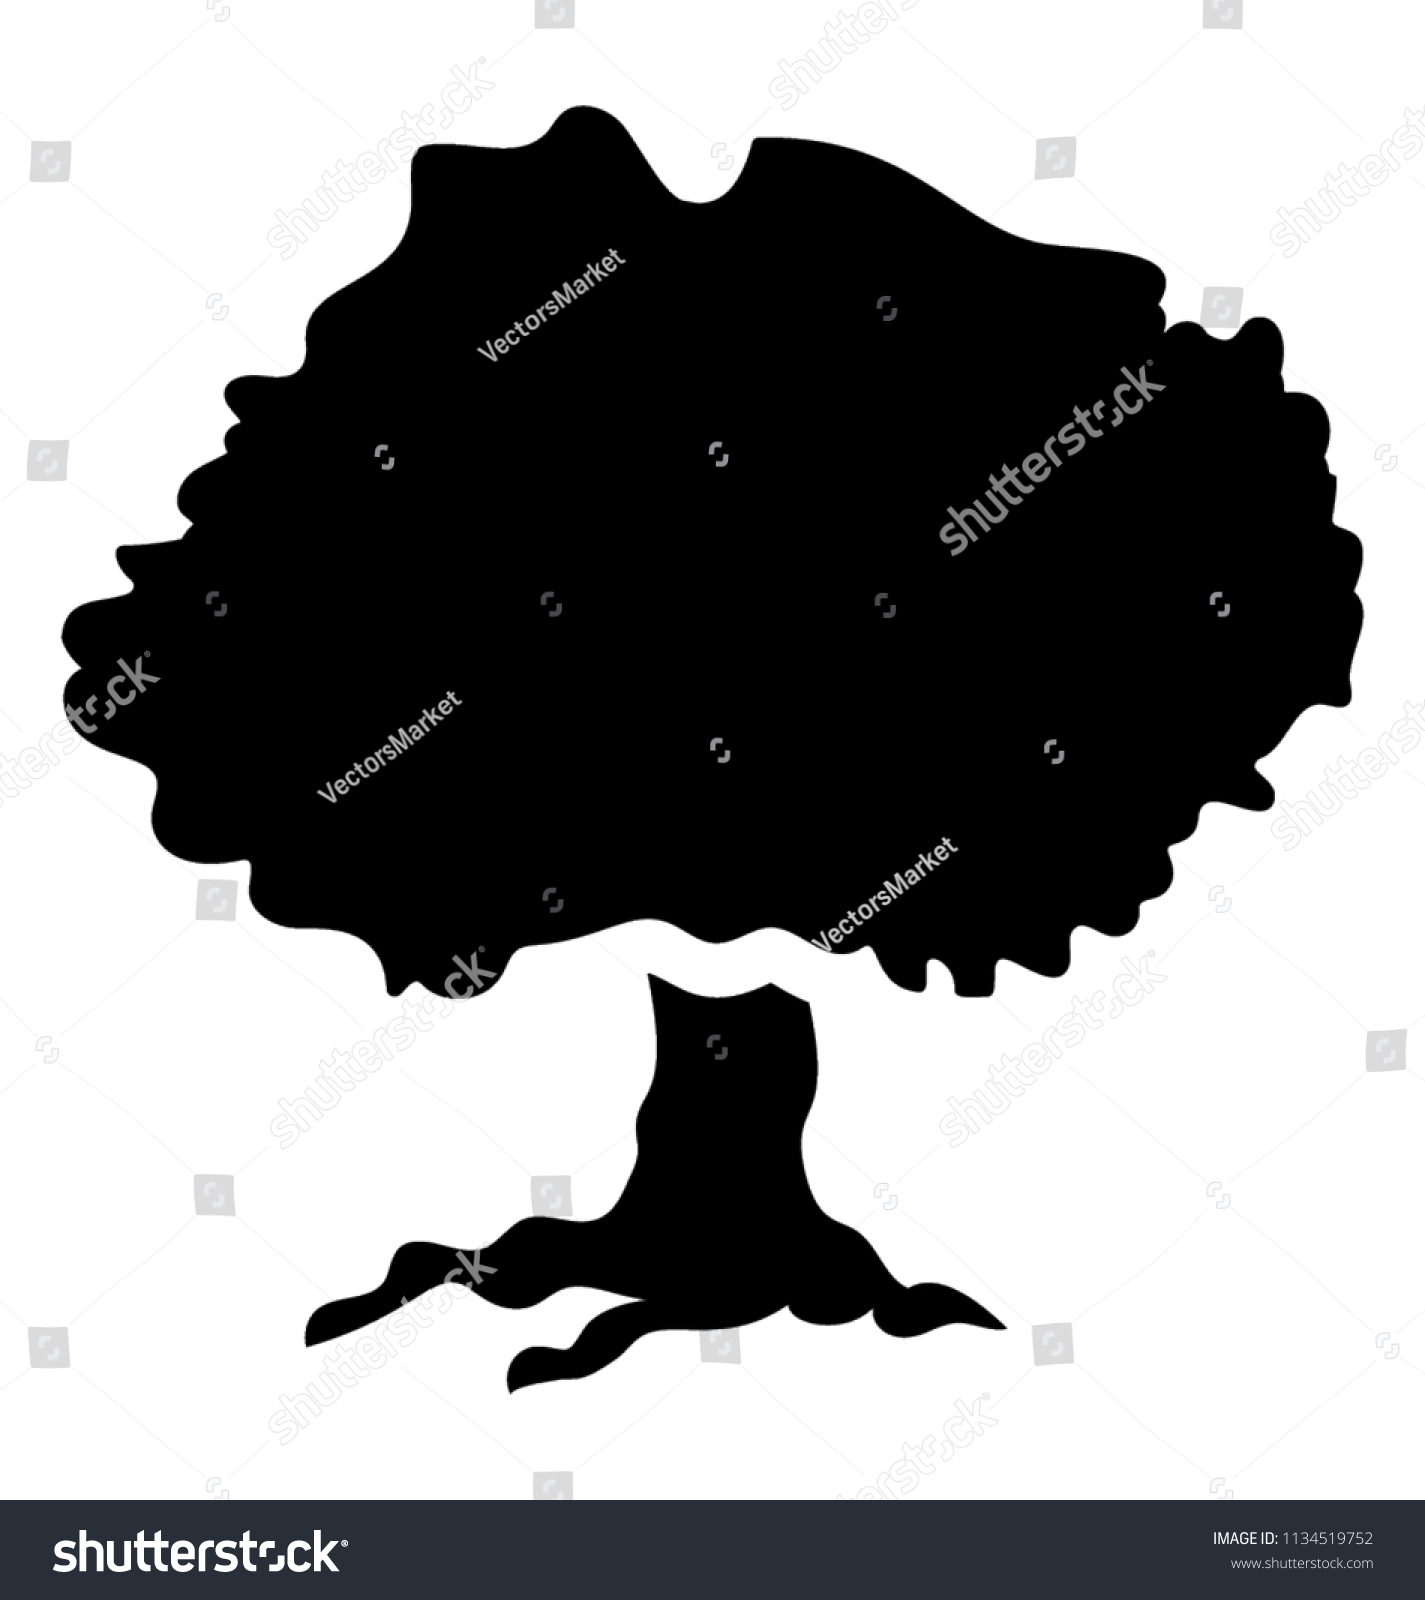 
A simple icon design of a hackberry tree
 #1134519752